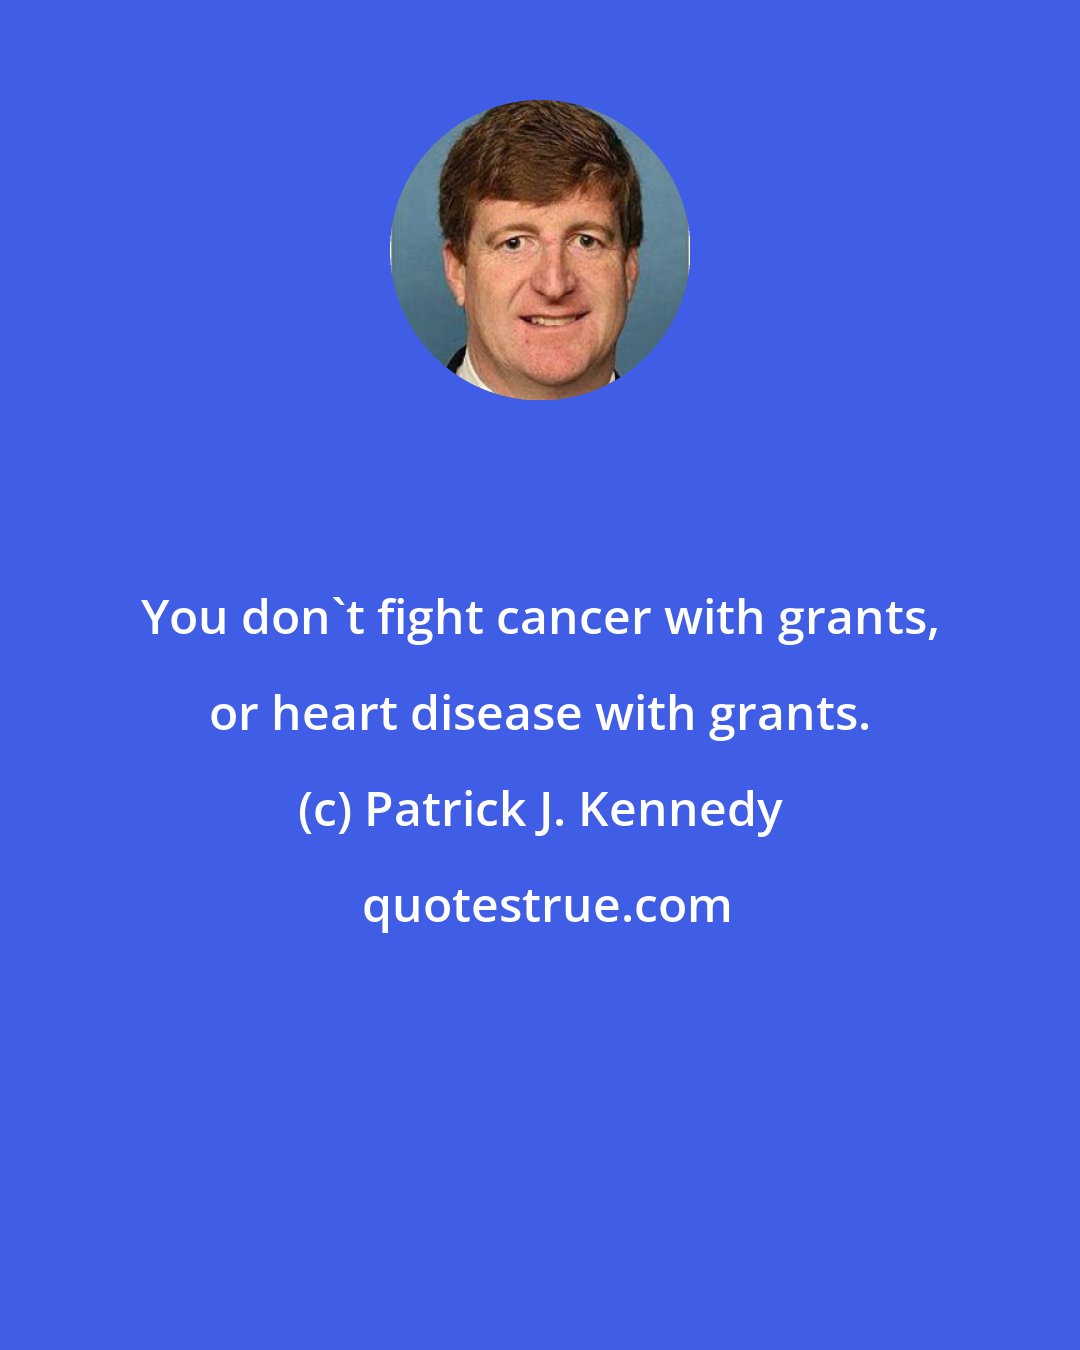 Patrick J. Kennedy: You don't fight cancer with grants, or heart disease with grants.